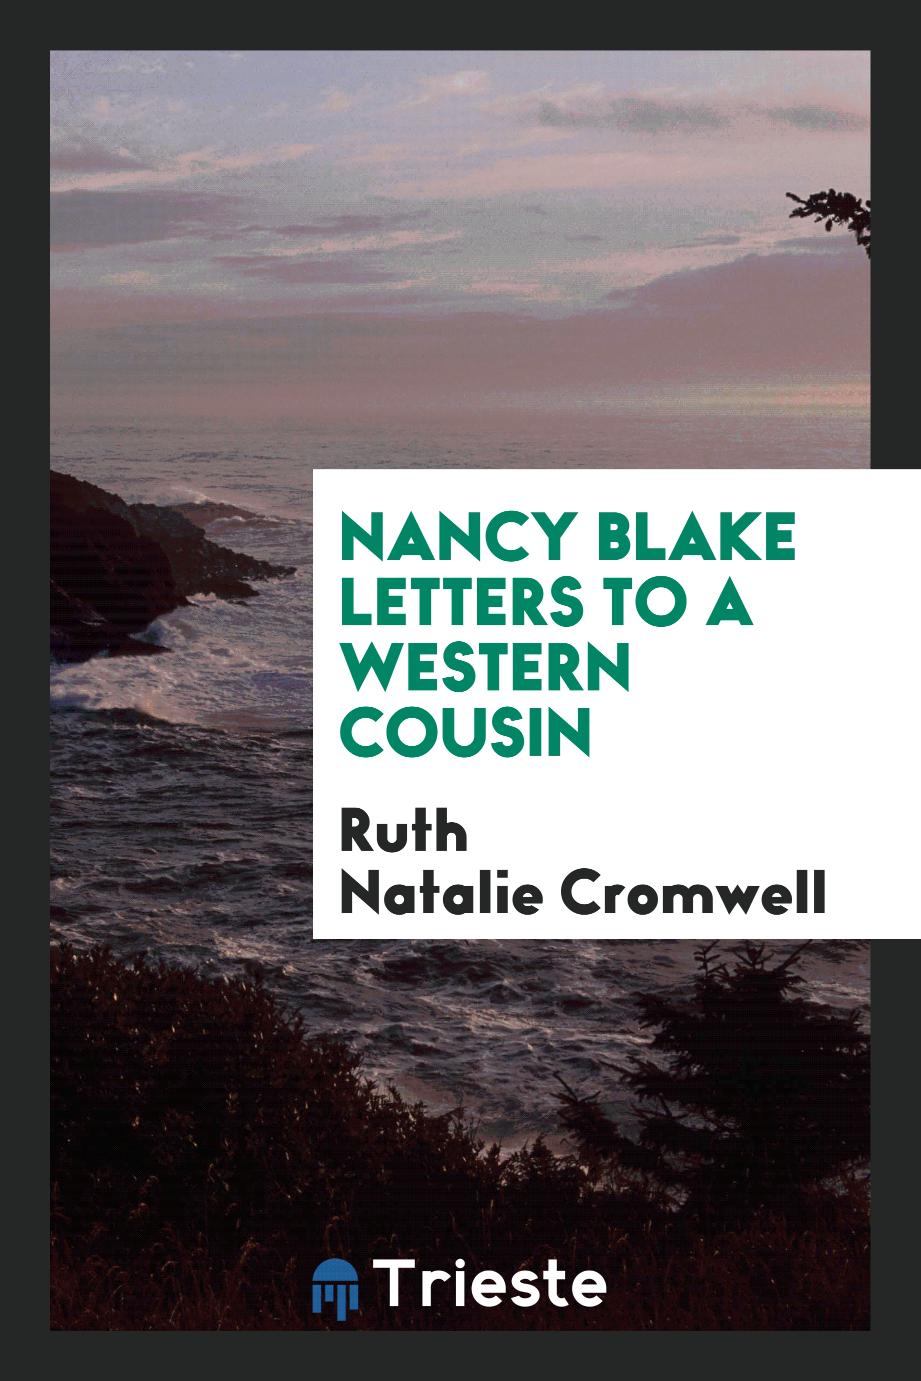 Nancy Blake letters to a western cousin